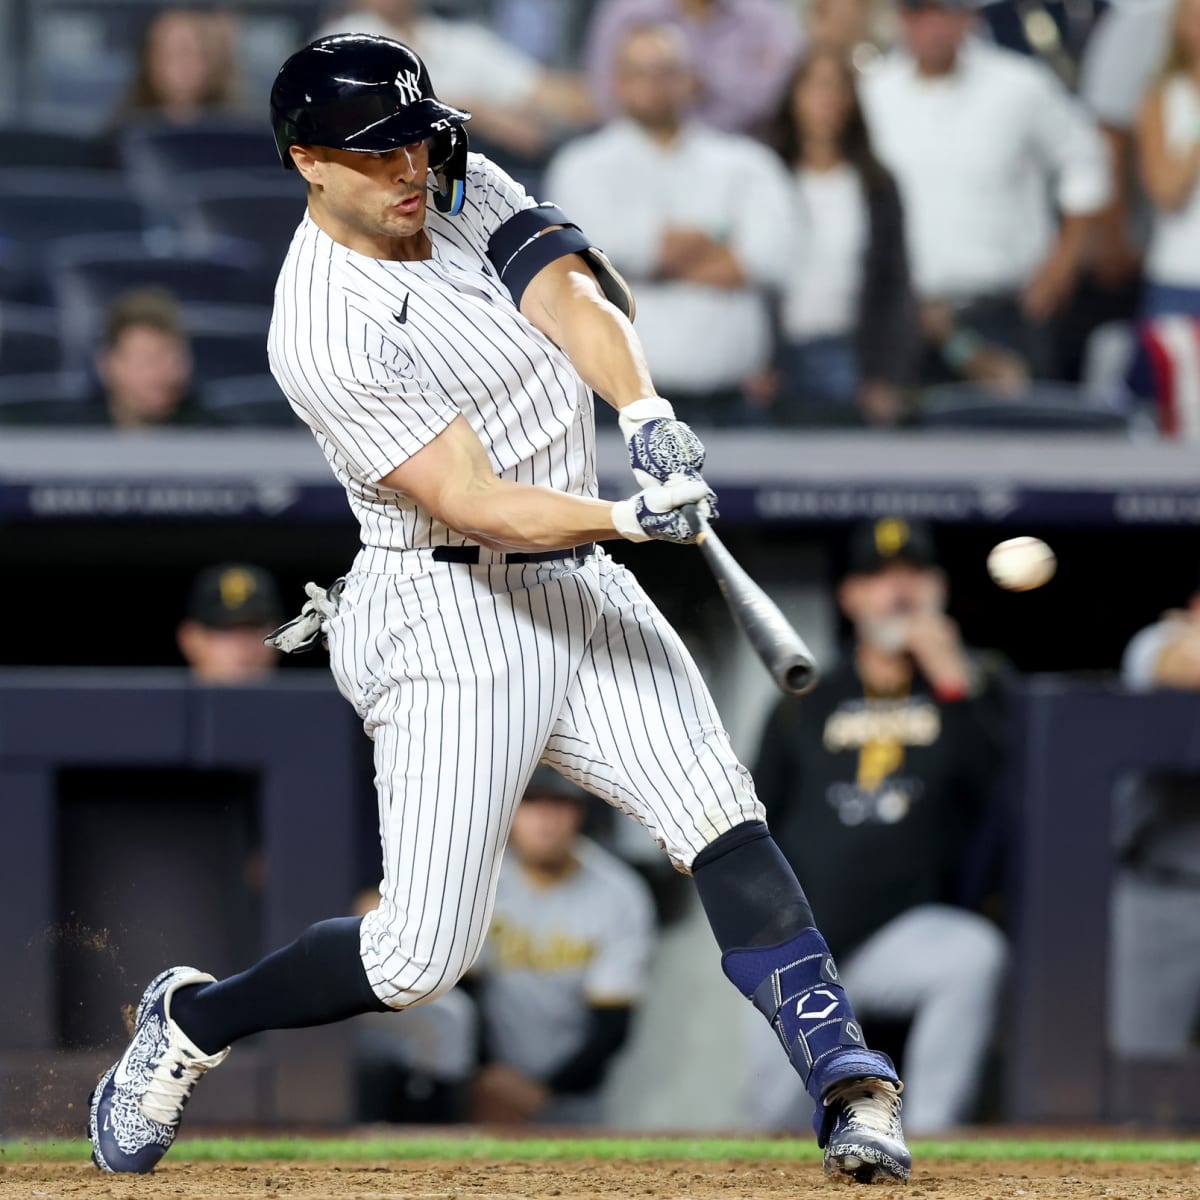 Giancarlo Stanton Breaks Out of Slump, Leading New York Yankees to